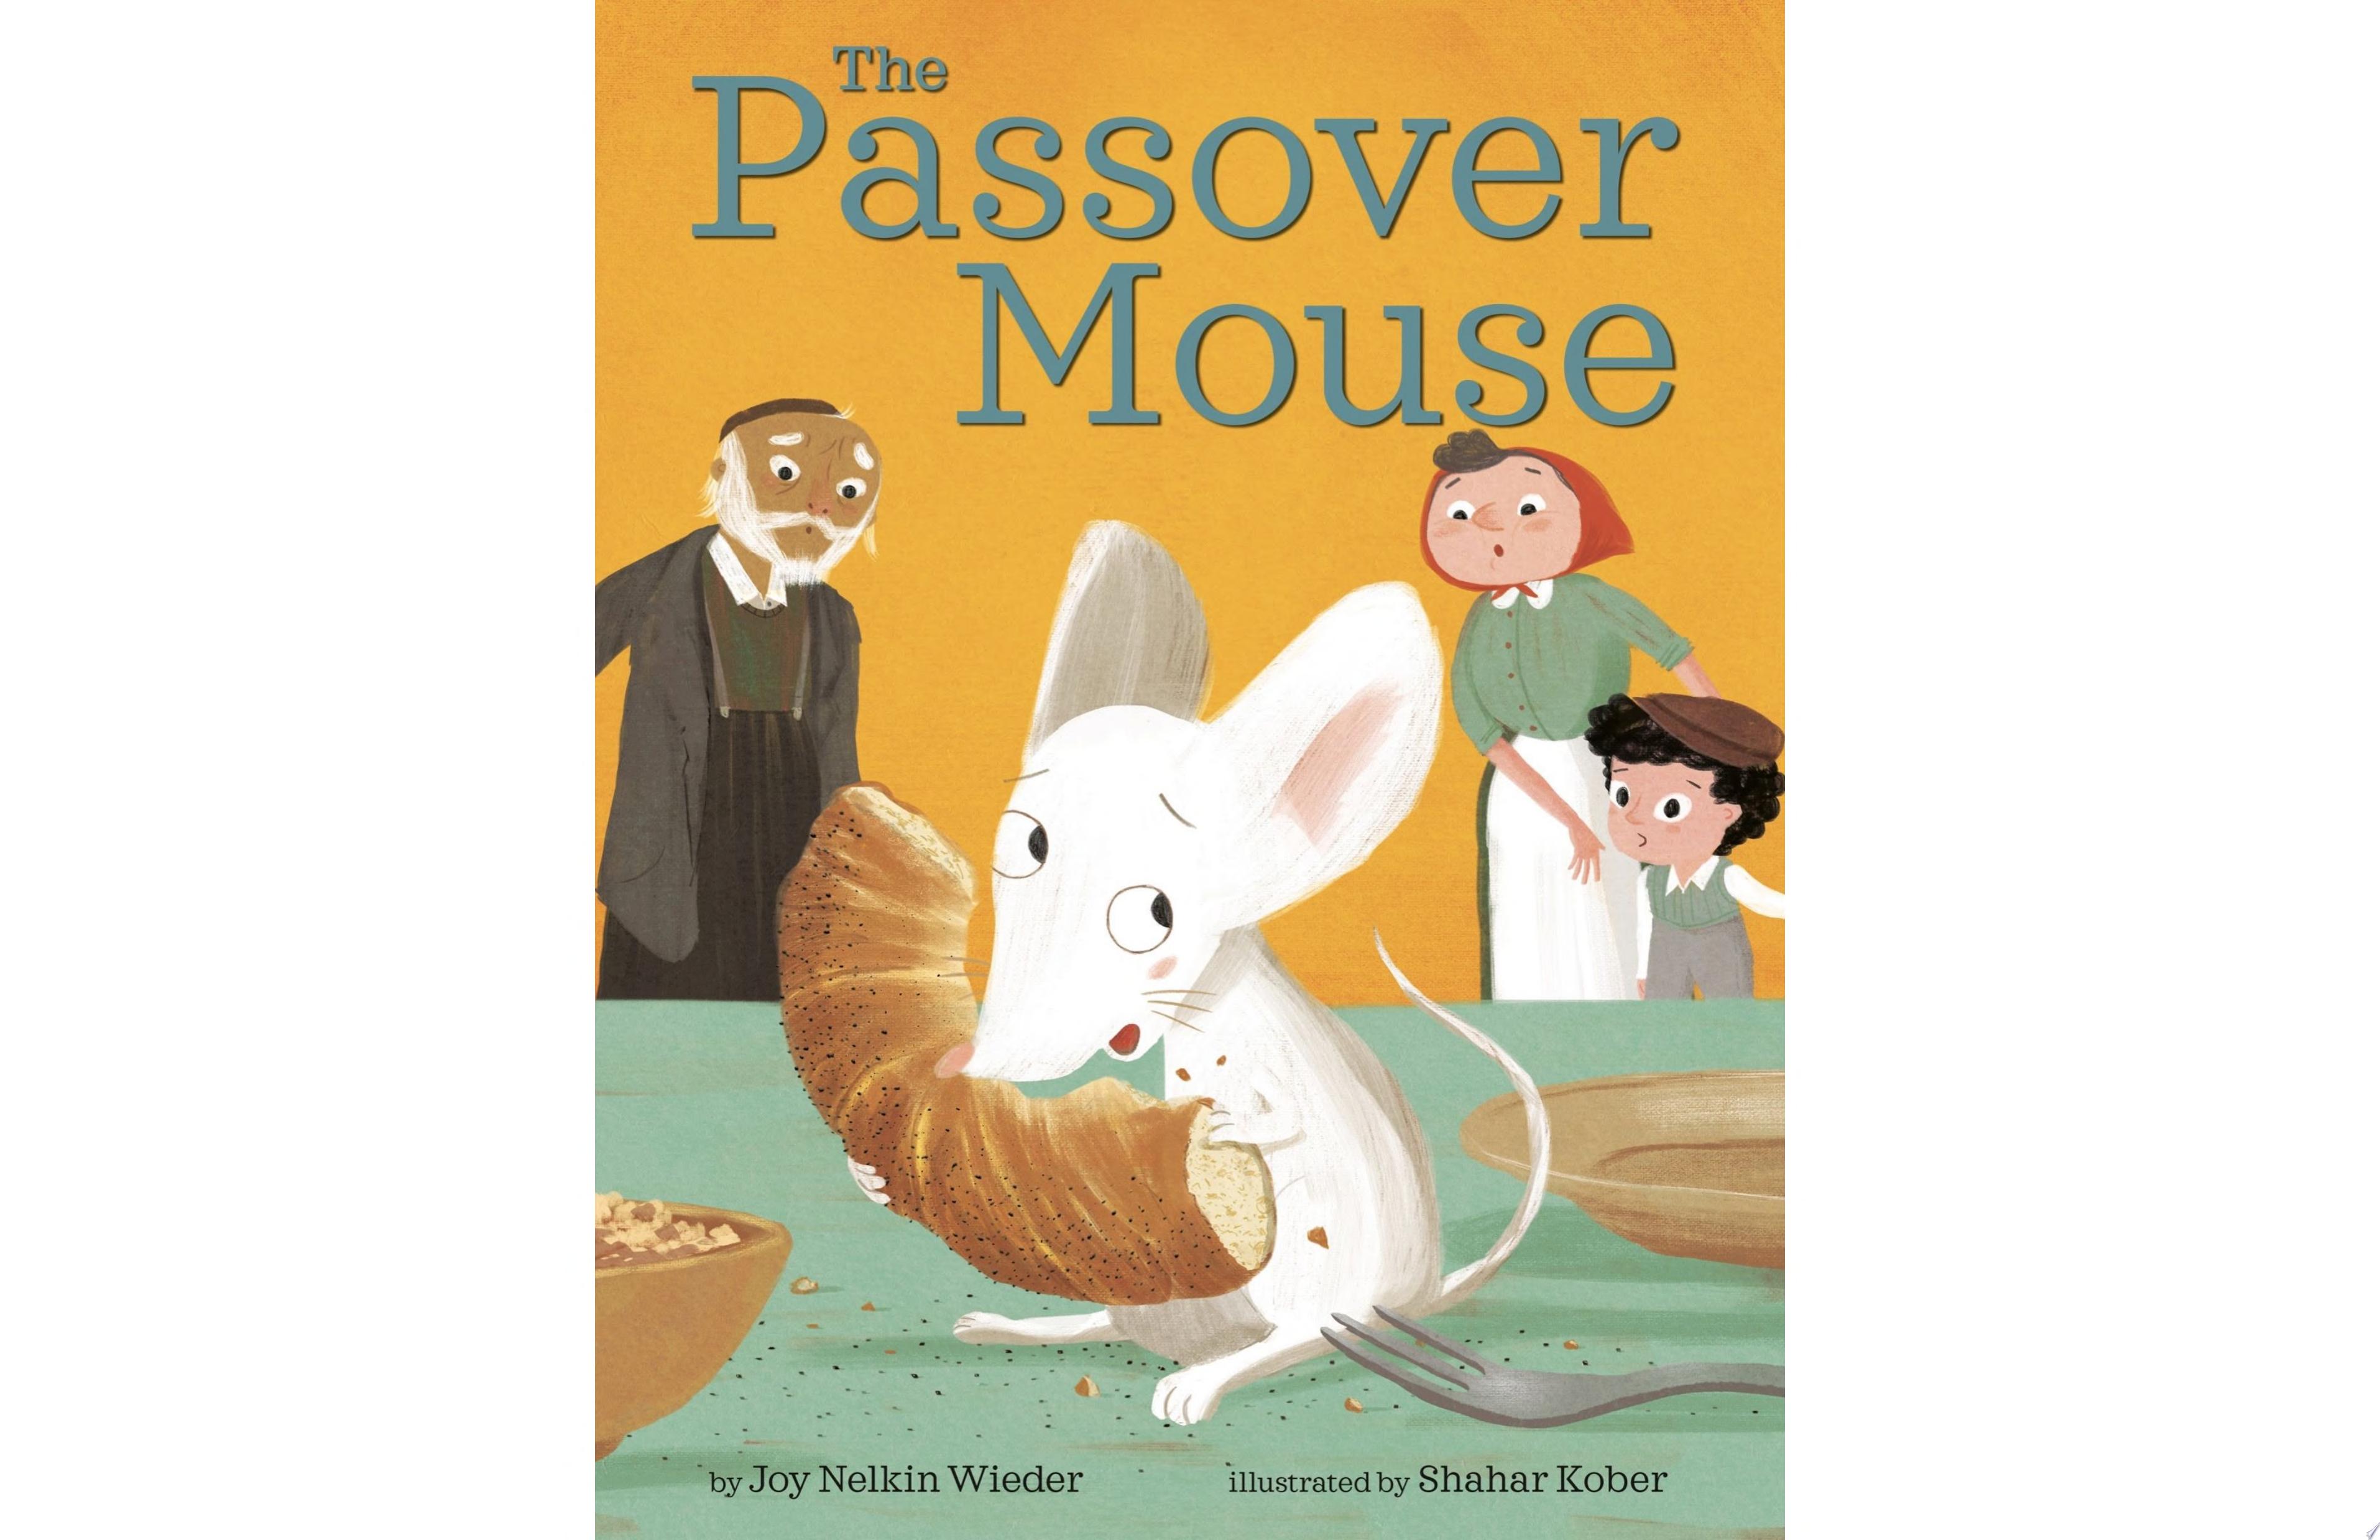 Image for "The Passover Mouse"